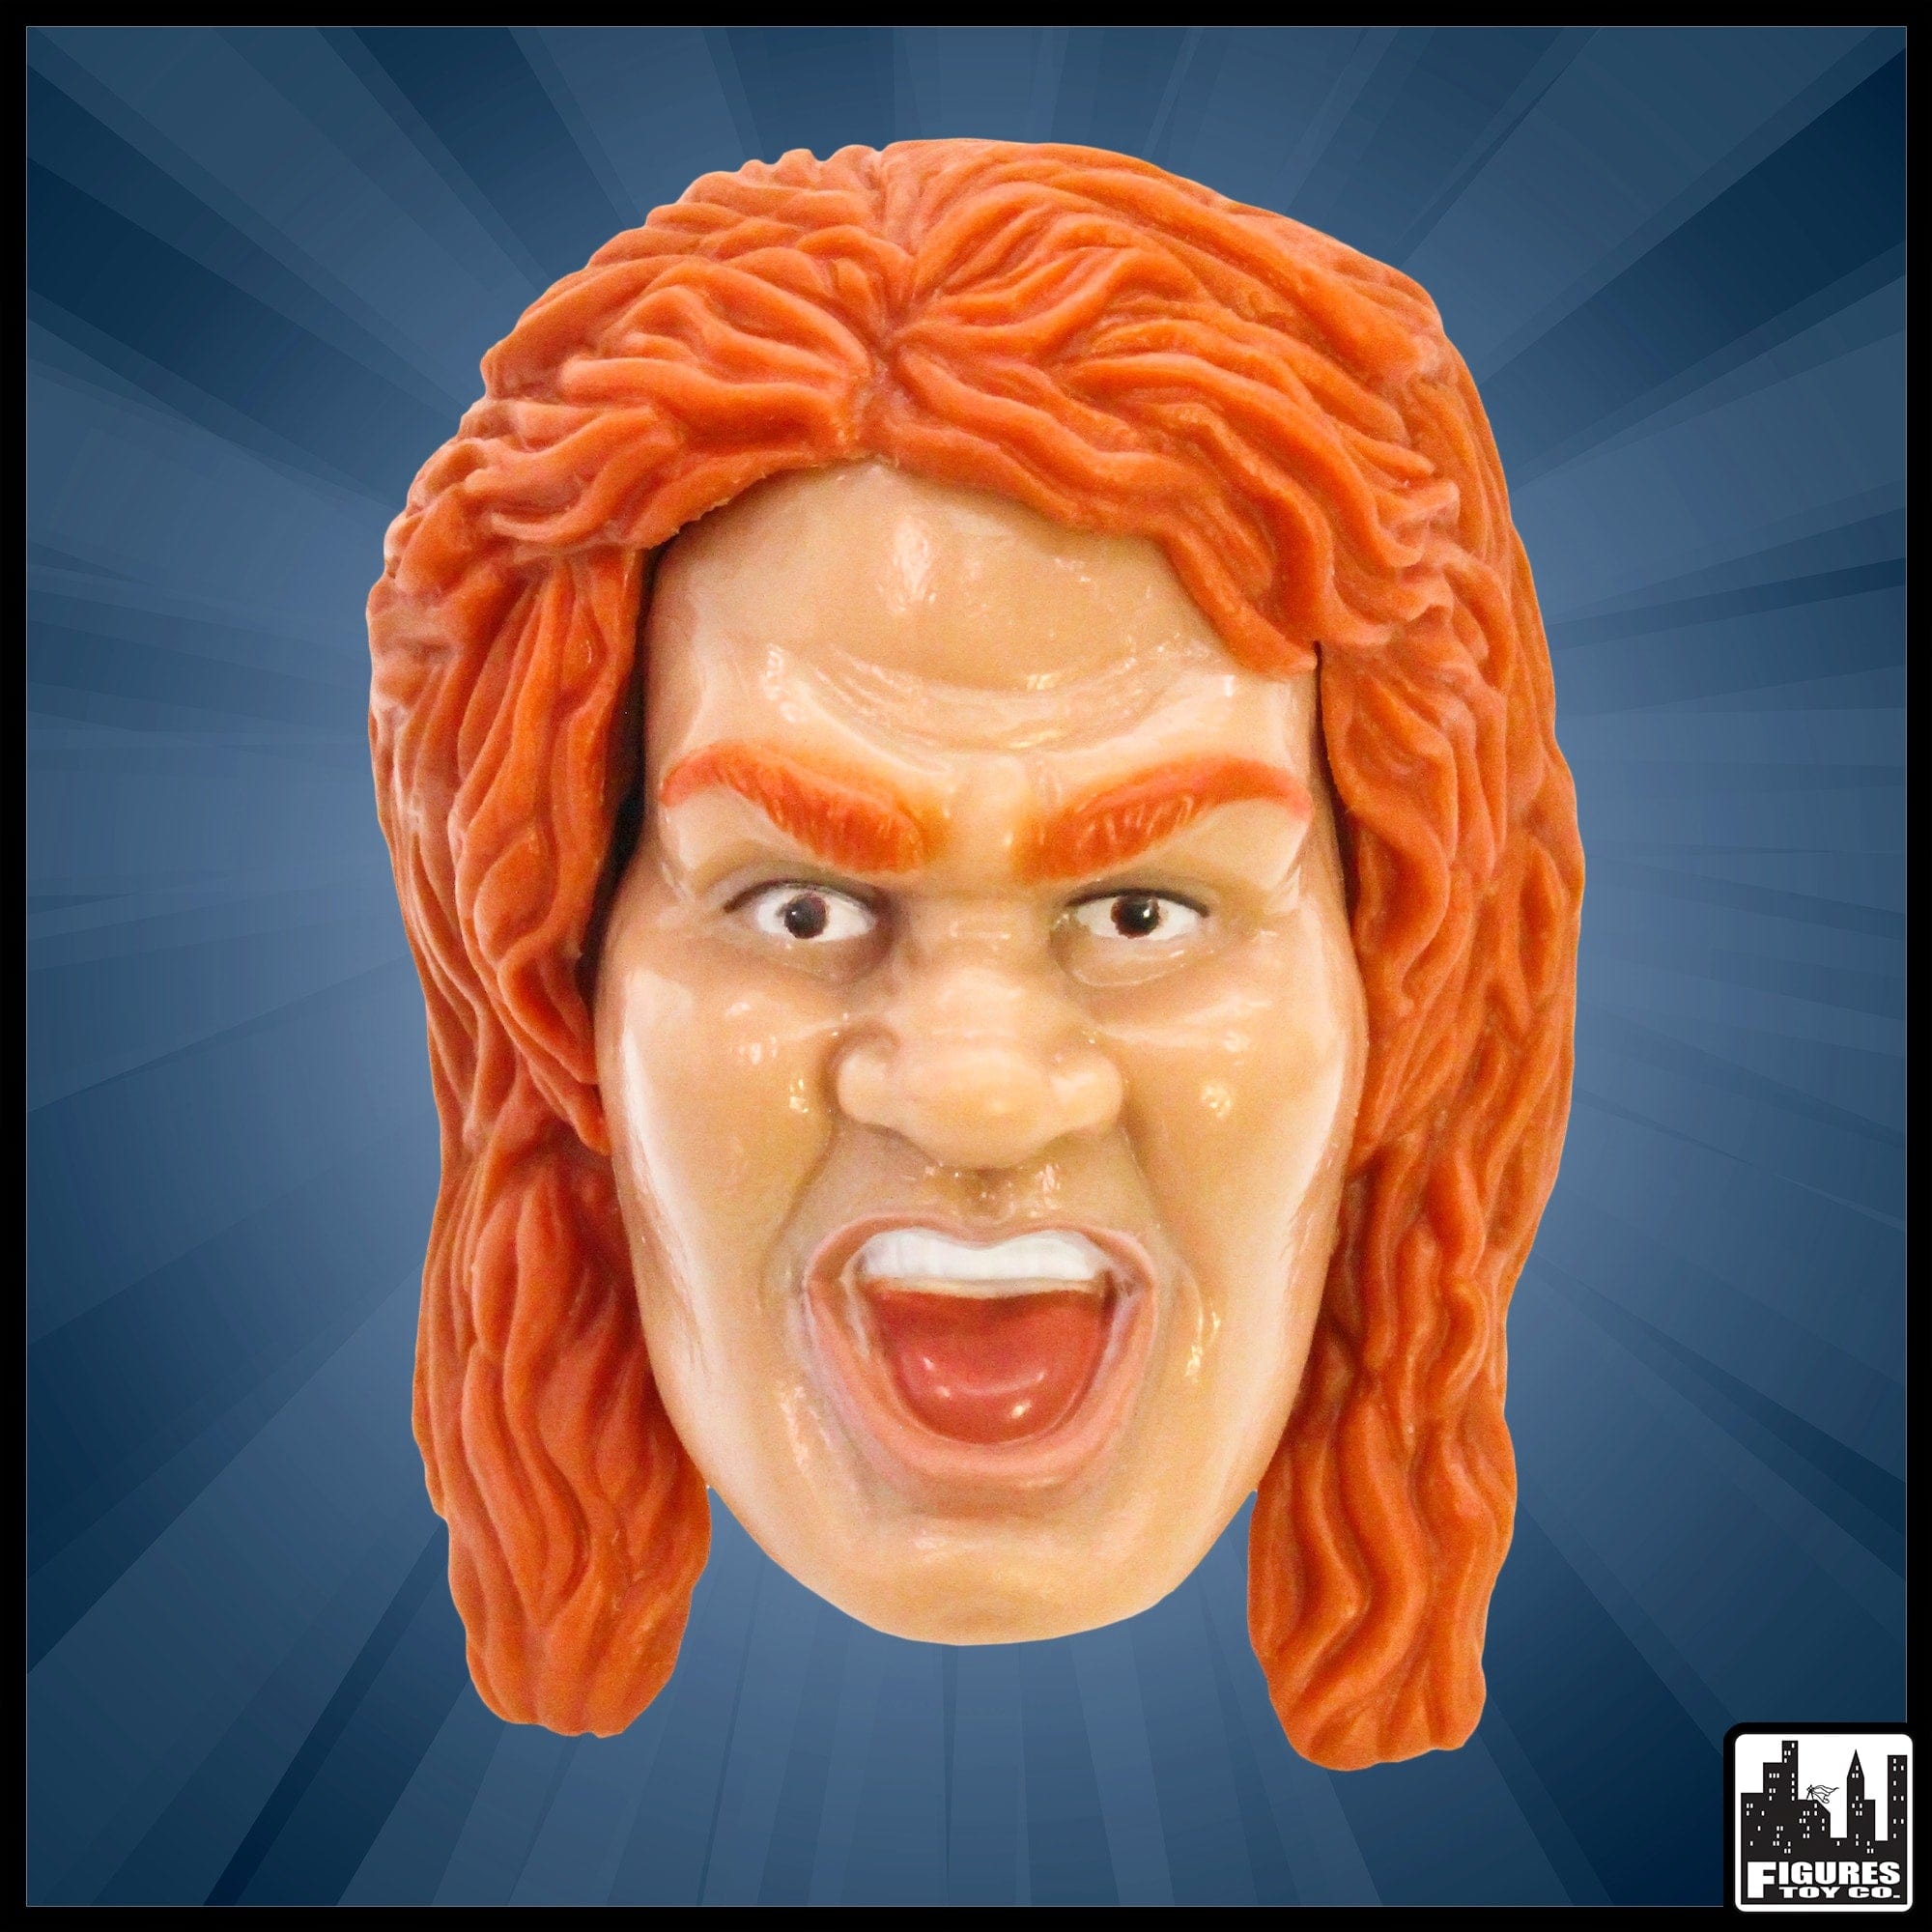 White Male Interchangeable Wrestling Action Figure Head With Long Red Hair